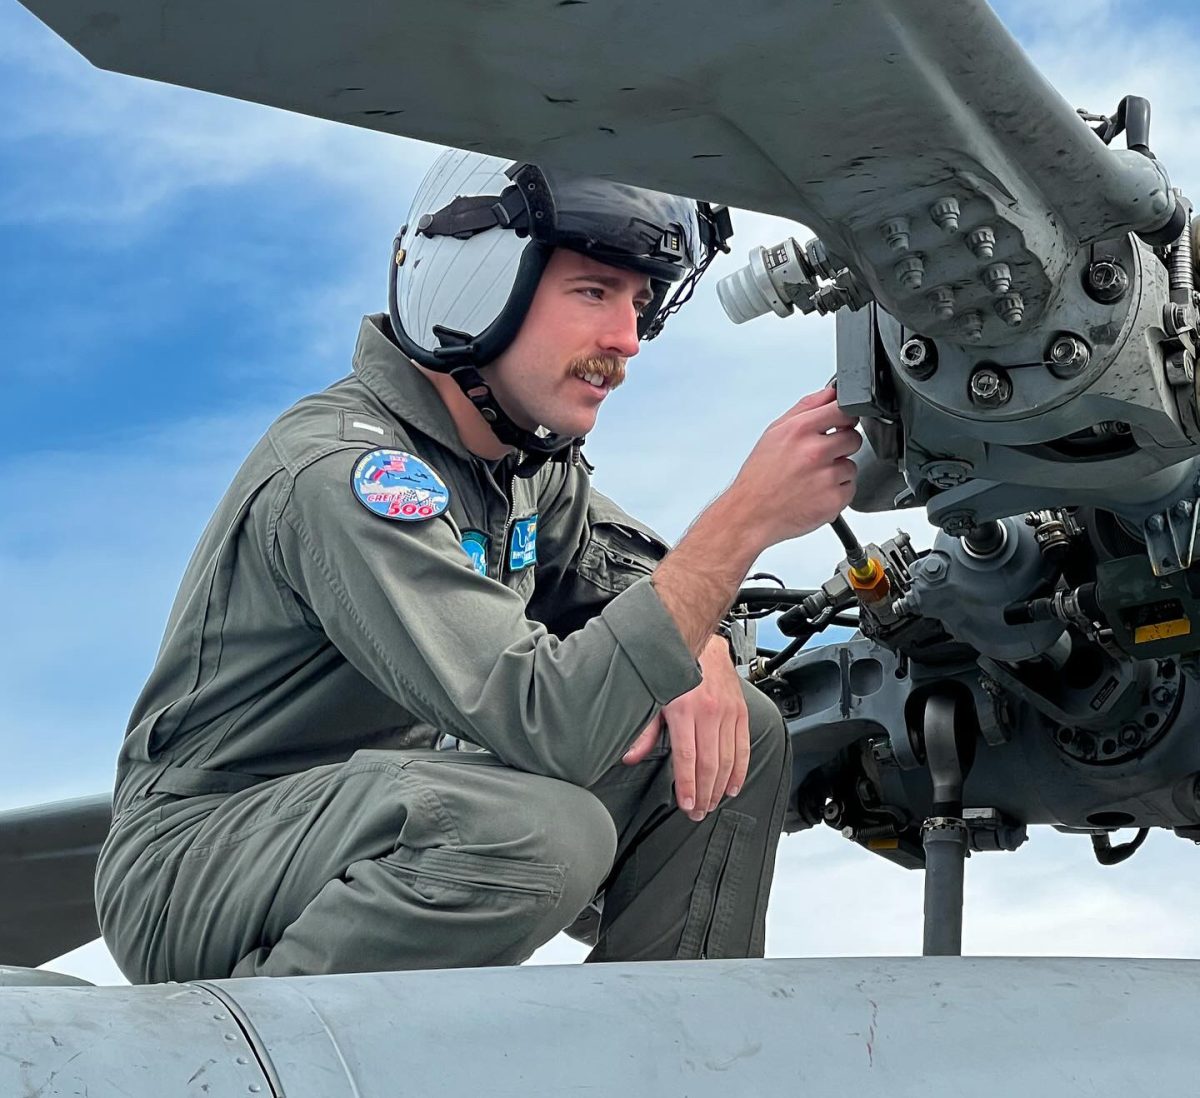 Griffin+Hinkley+administers+a+preflight+inspection+of+his+MH-60R+helicopter+while+aboard+the+USS+Gravely+in+March+2022.+The+USS+Gravely+was+conducting+deployed+flight+operations+in+the+Mediterranean+Sea.+Photo+used+with+permission+from+USS+Gravely+flight+crew.+